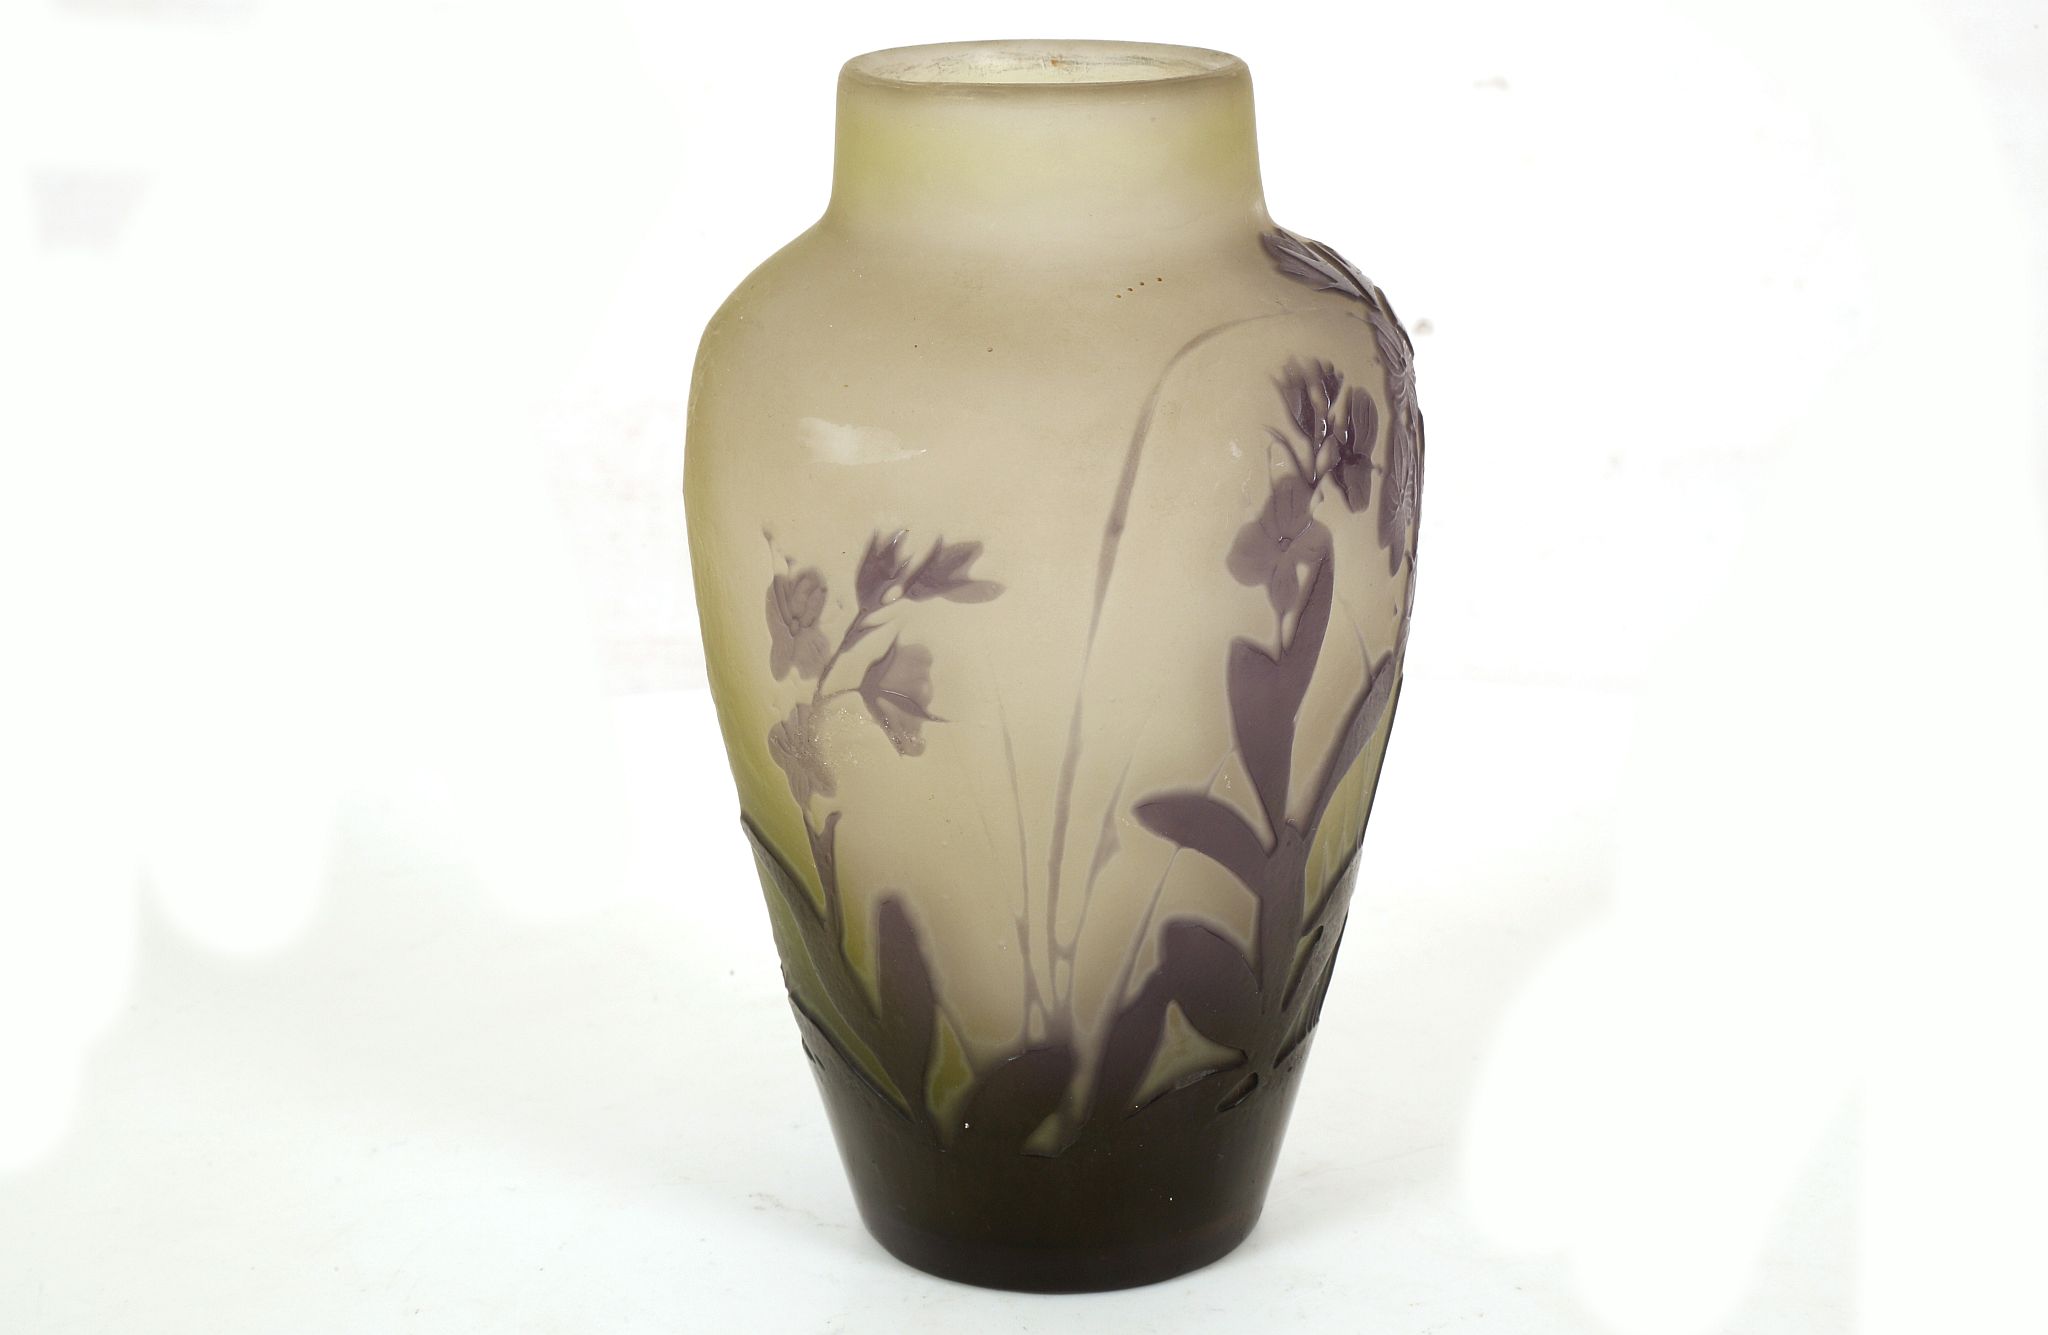 GALLE NANCY, CIRCA 1910, CAMEO GLASS VASE , overlaid and acid etched with flowers and leaves in